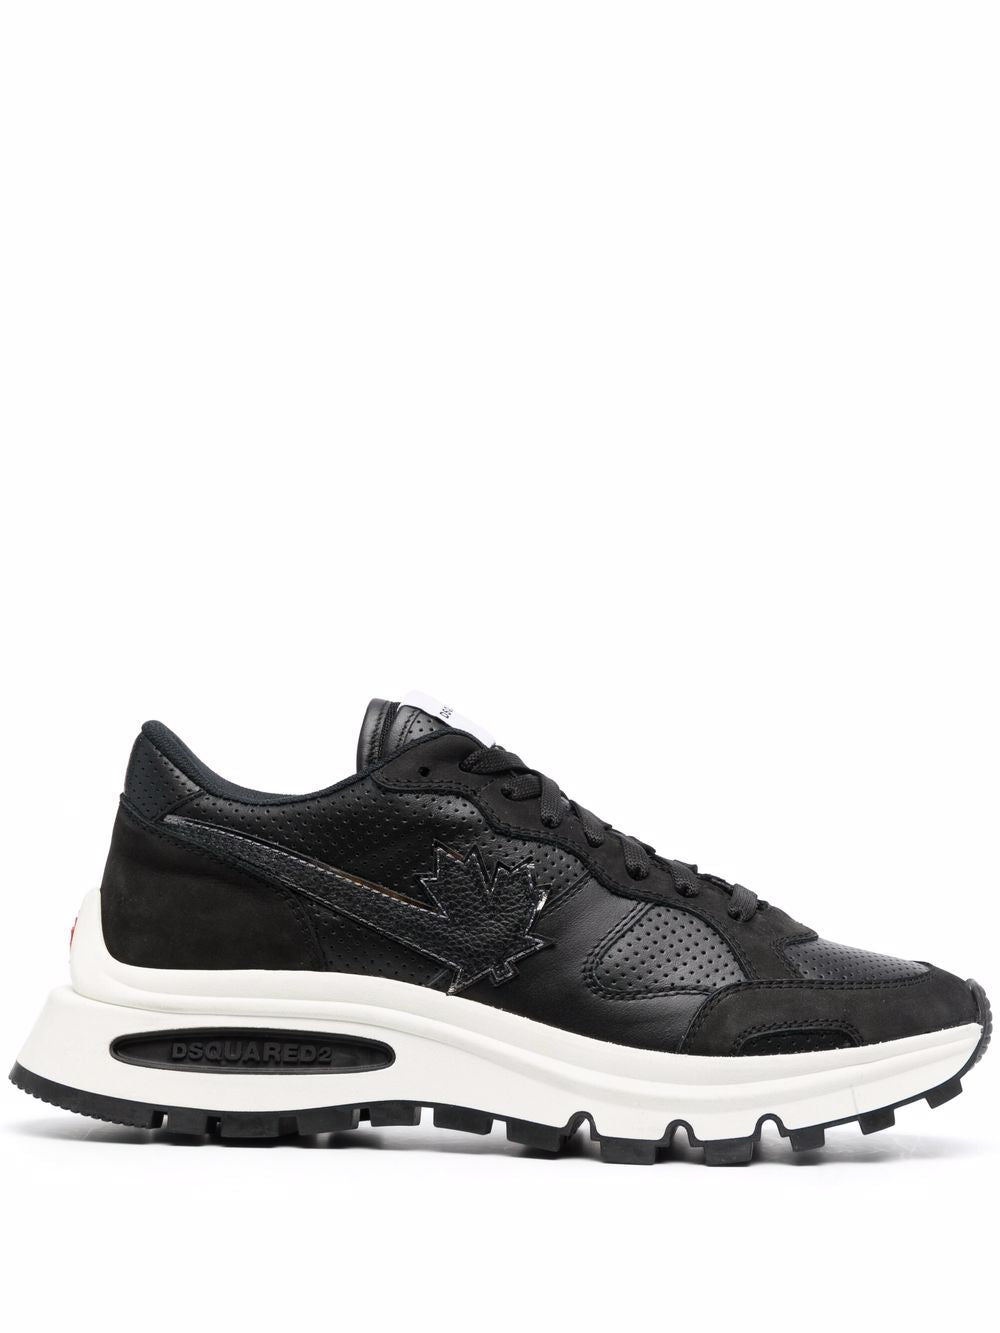 DSQUARED2 Run DS2 Sneakers Black